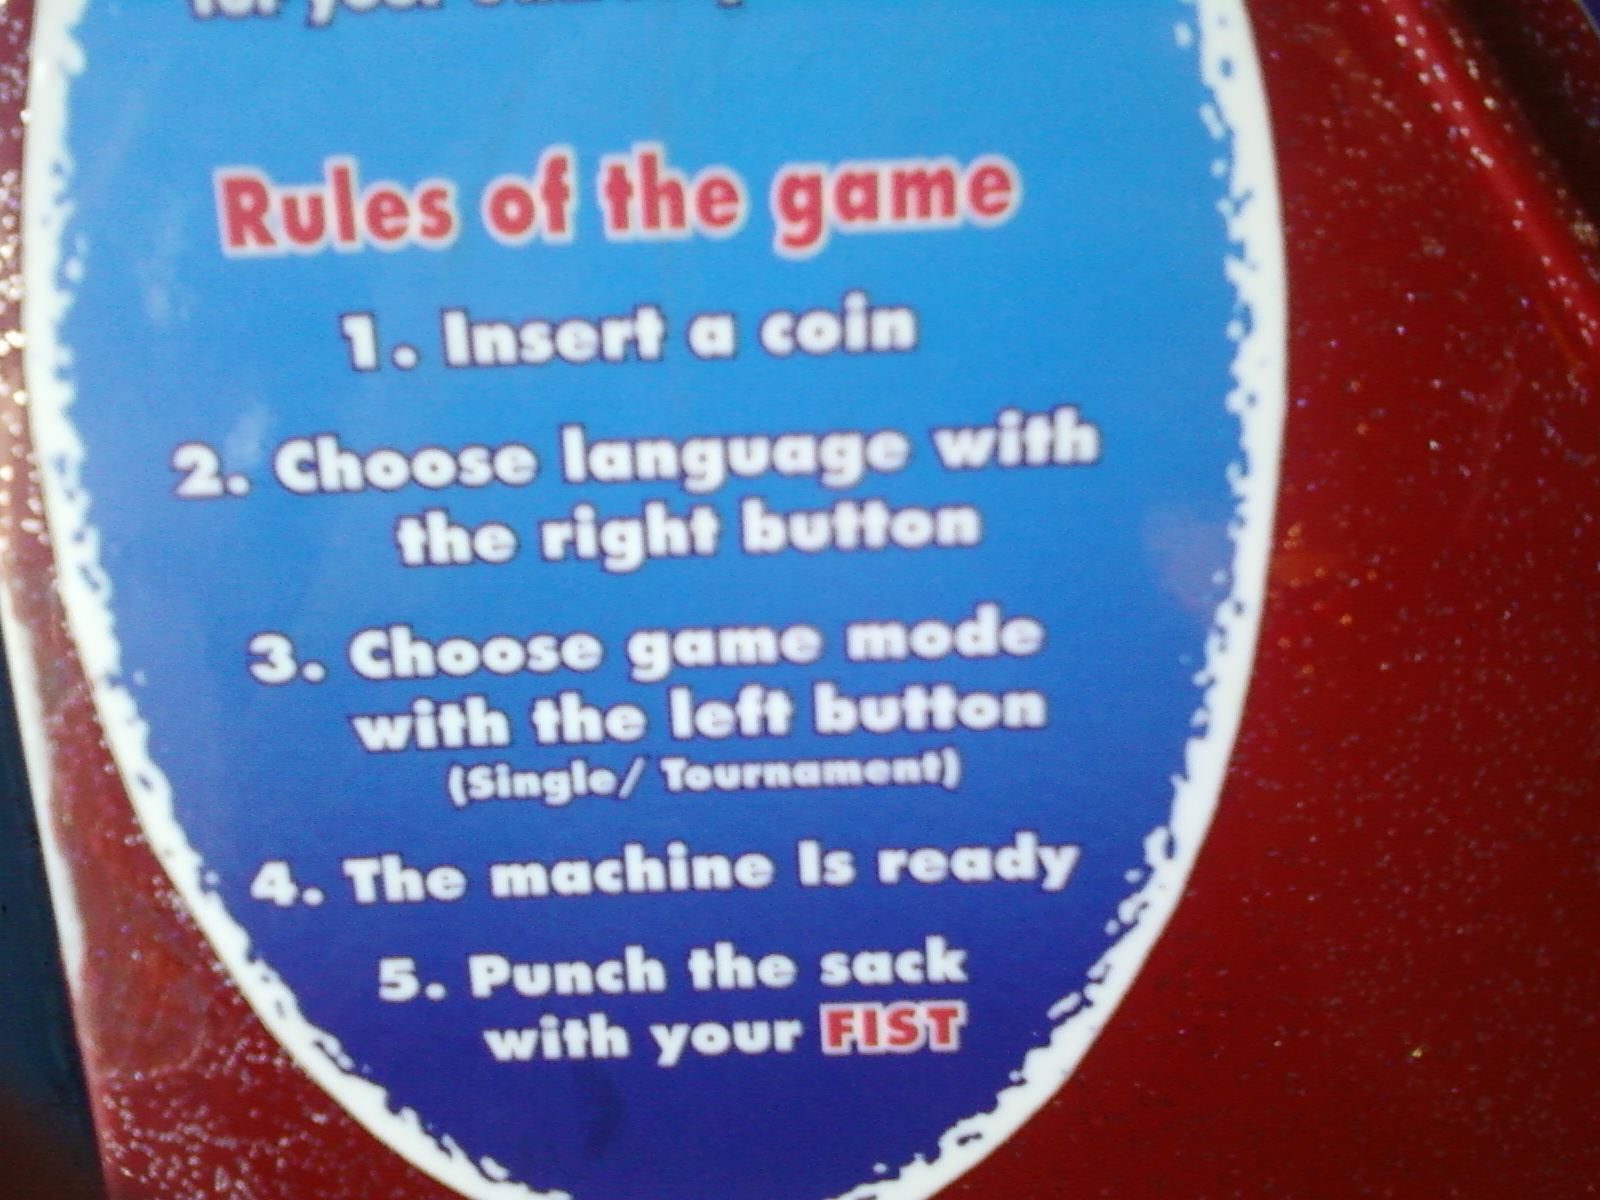 These are funny directions on a game where you punch a boxing bag to see how hard you can punch.